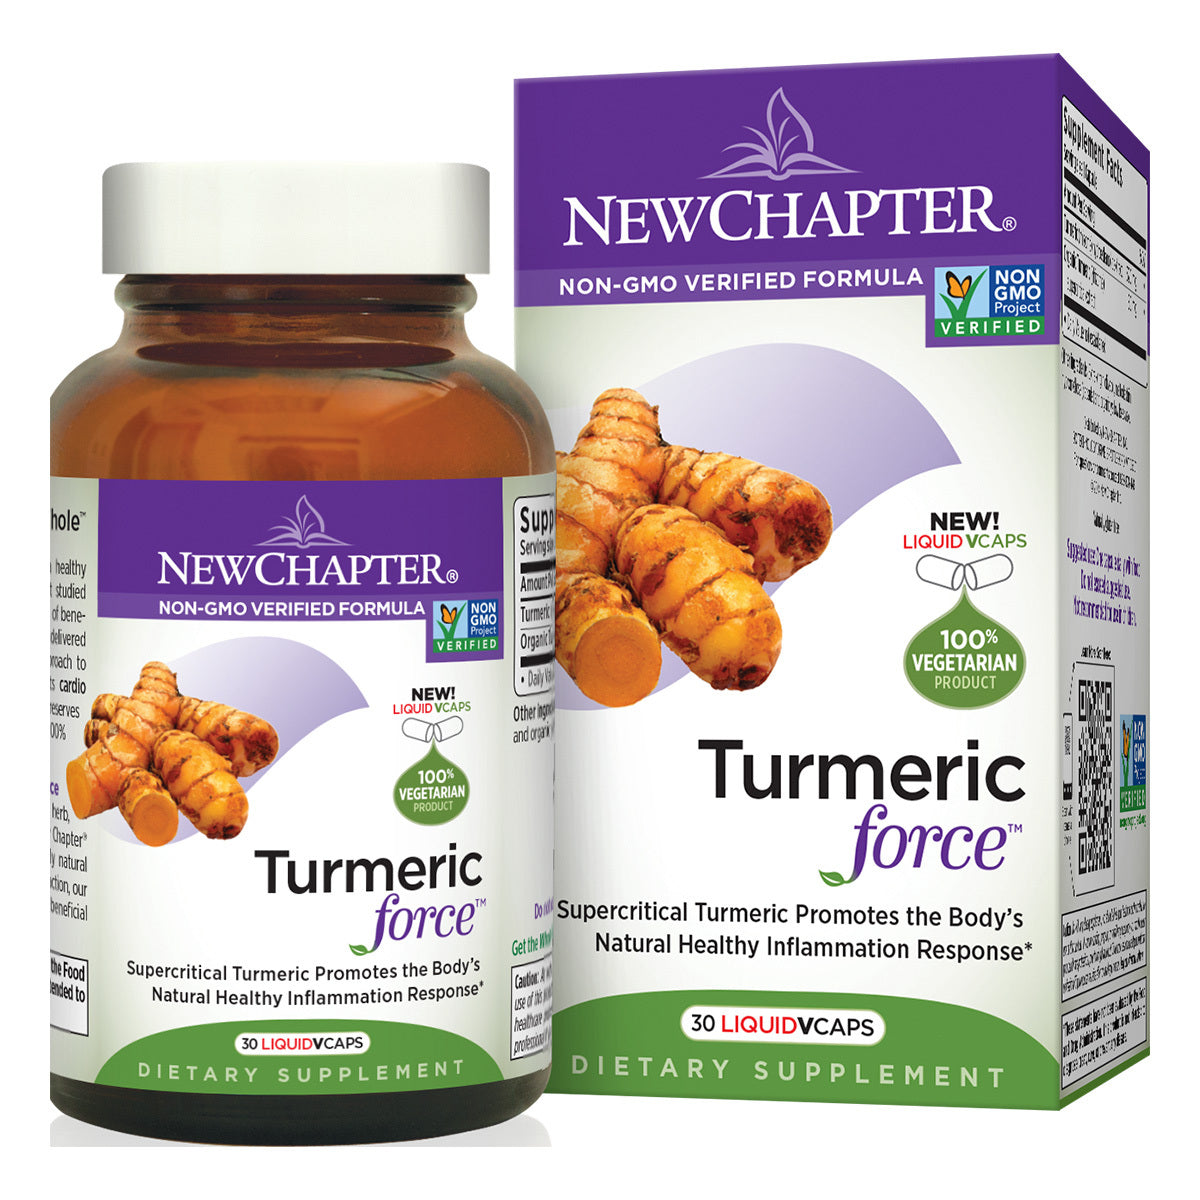 Primary image of Turmeric Force Capsules